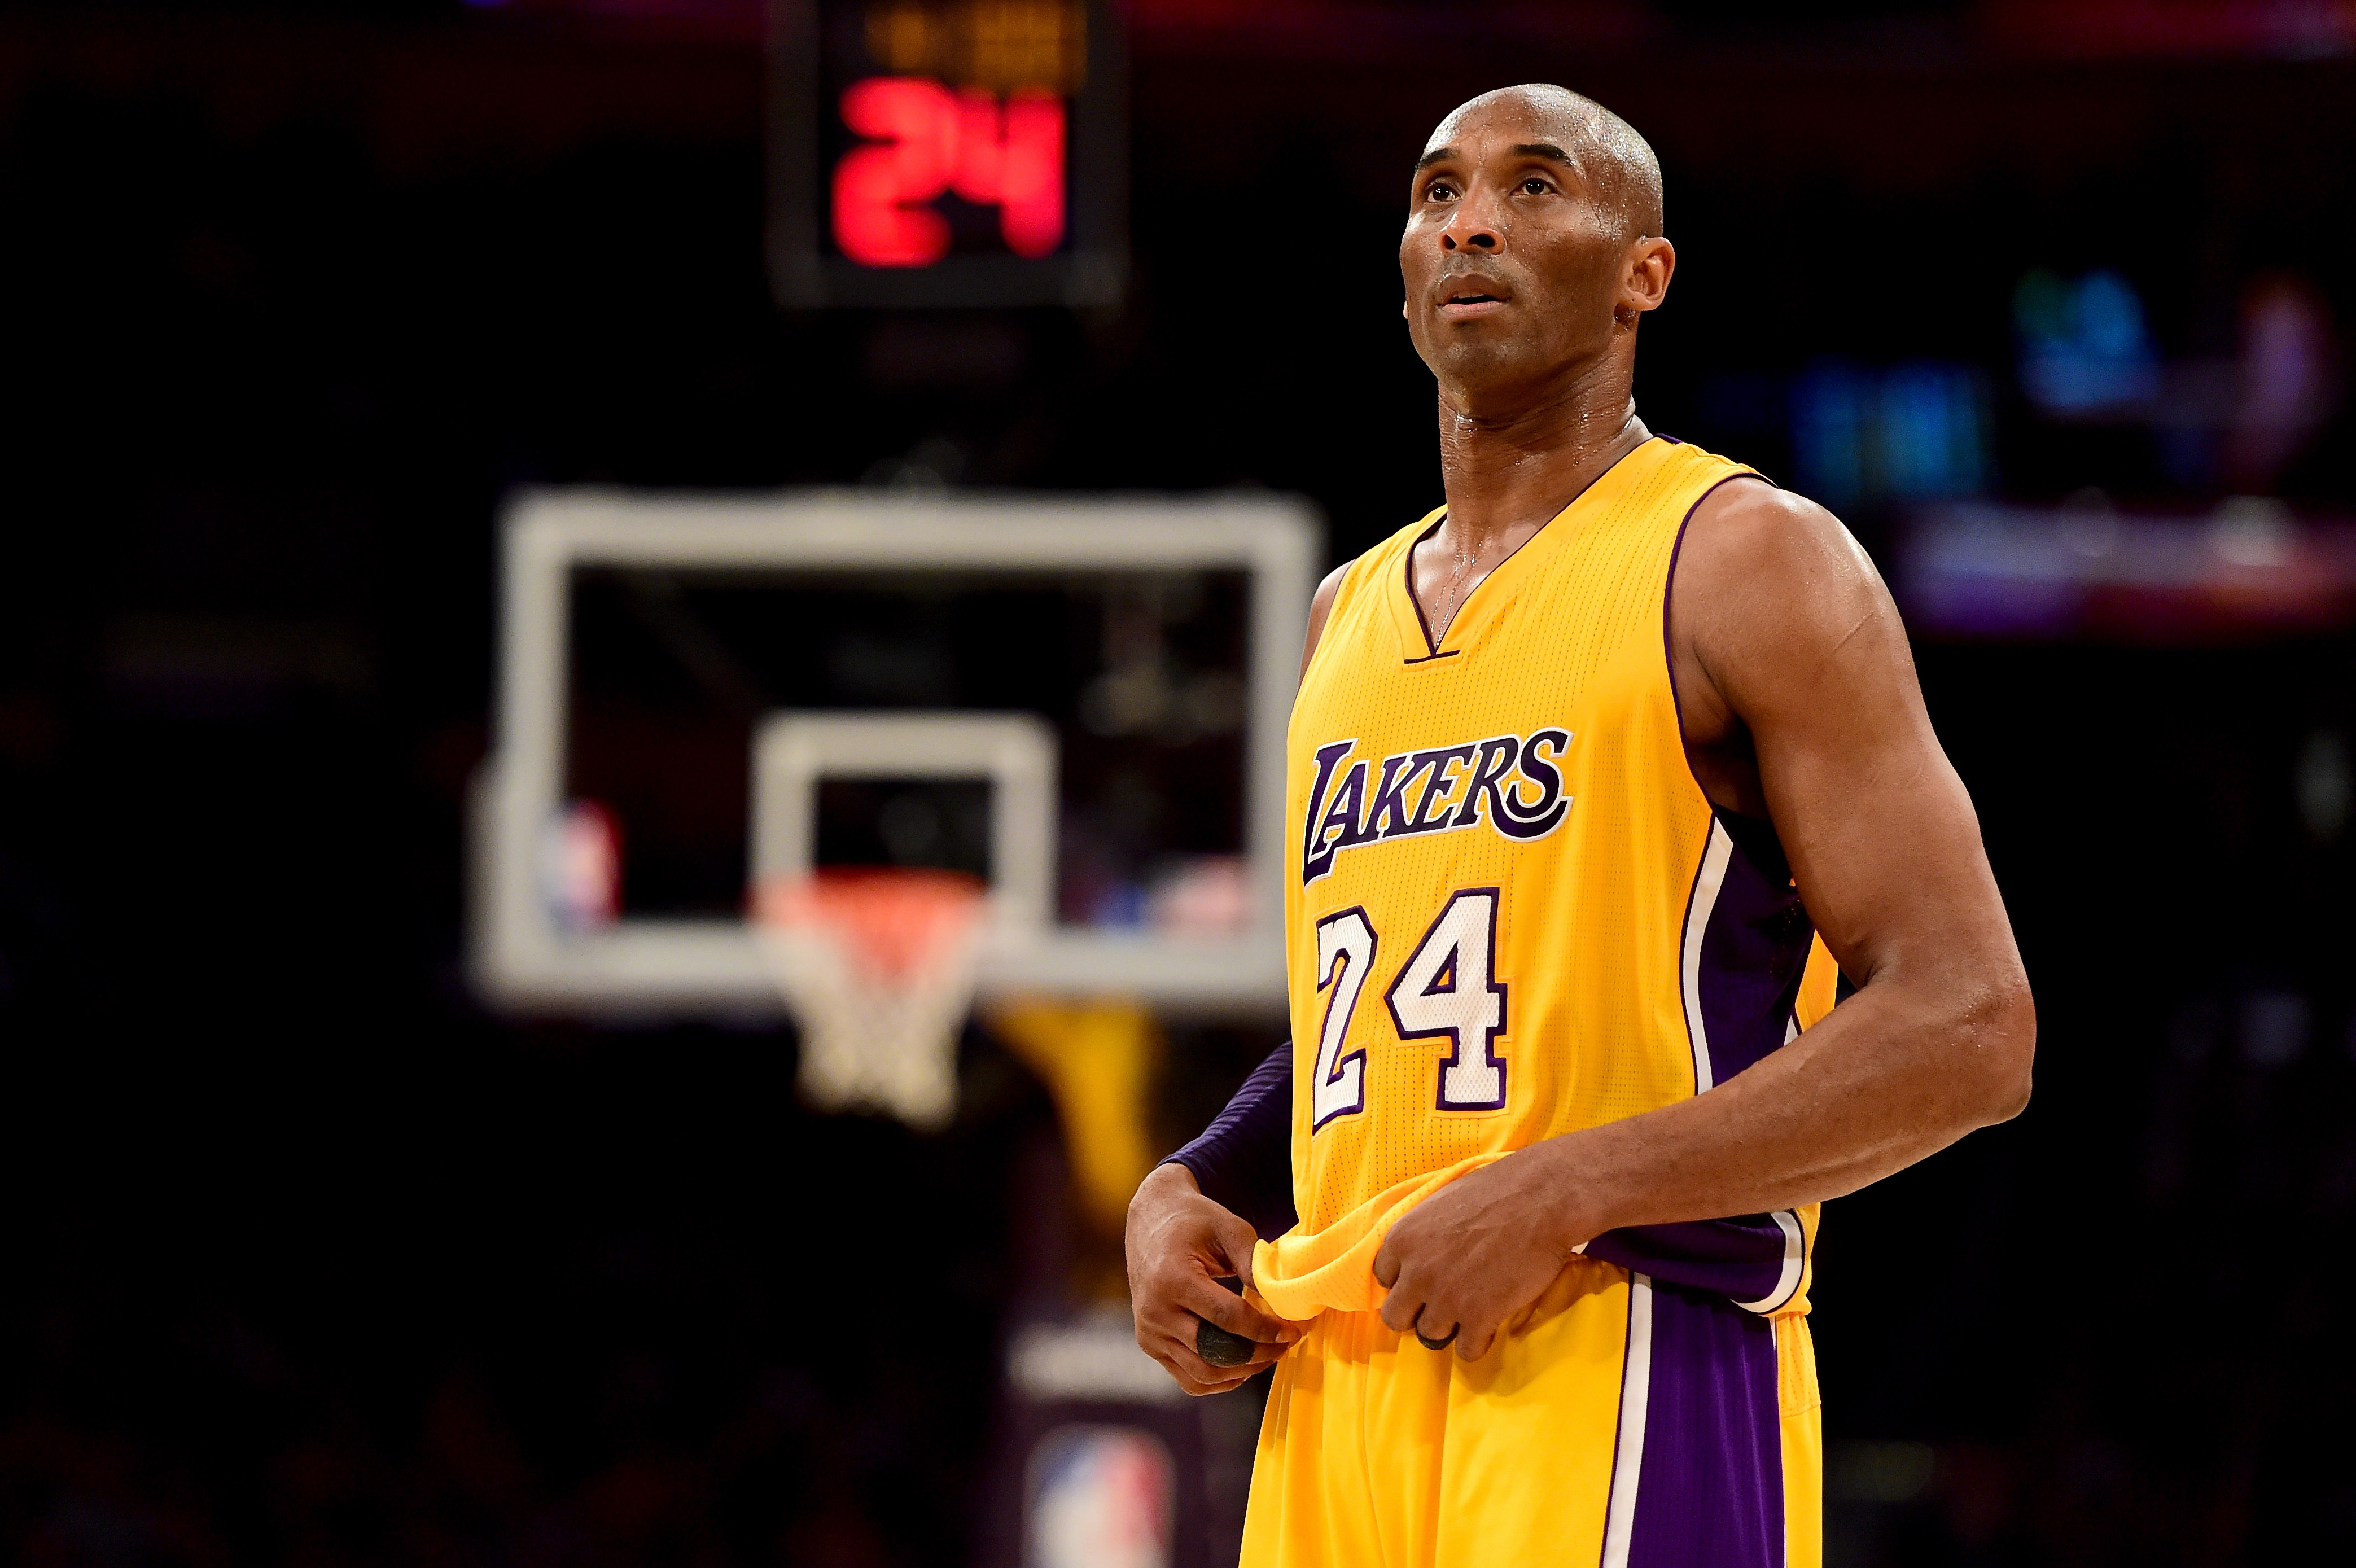 Rookie Kobe Bryant practices free throws with his non-shooting